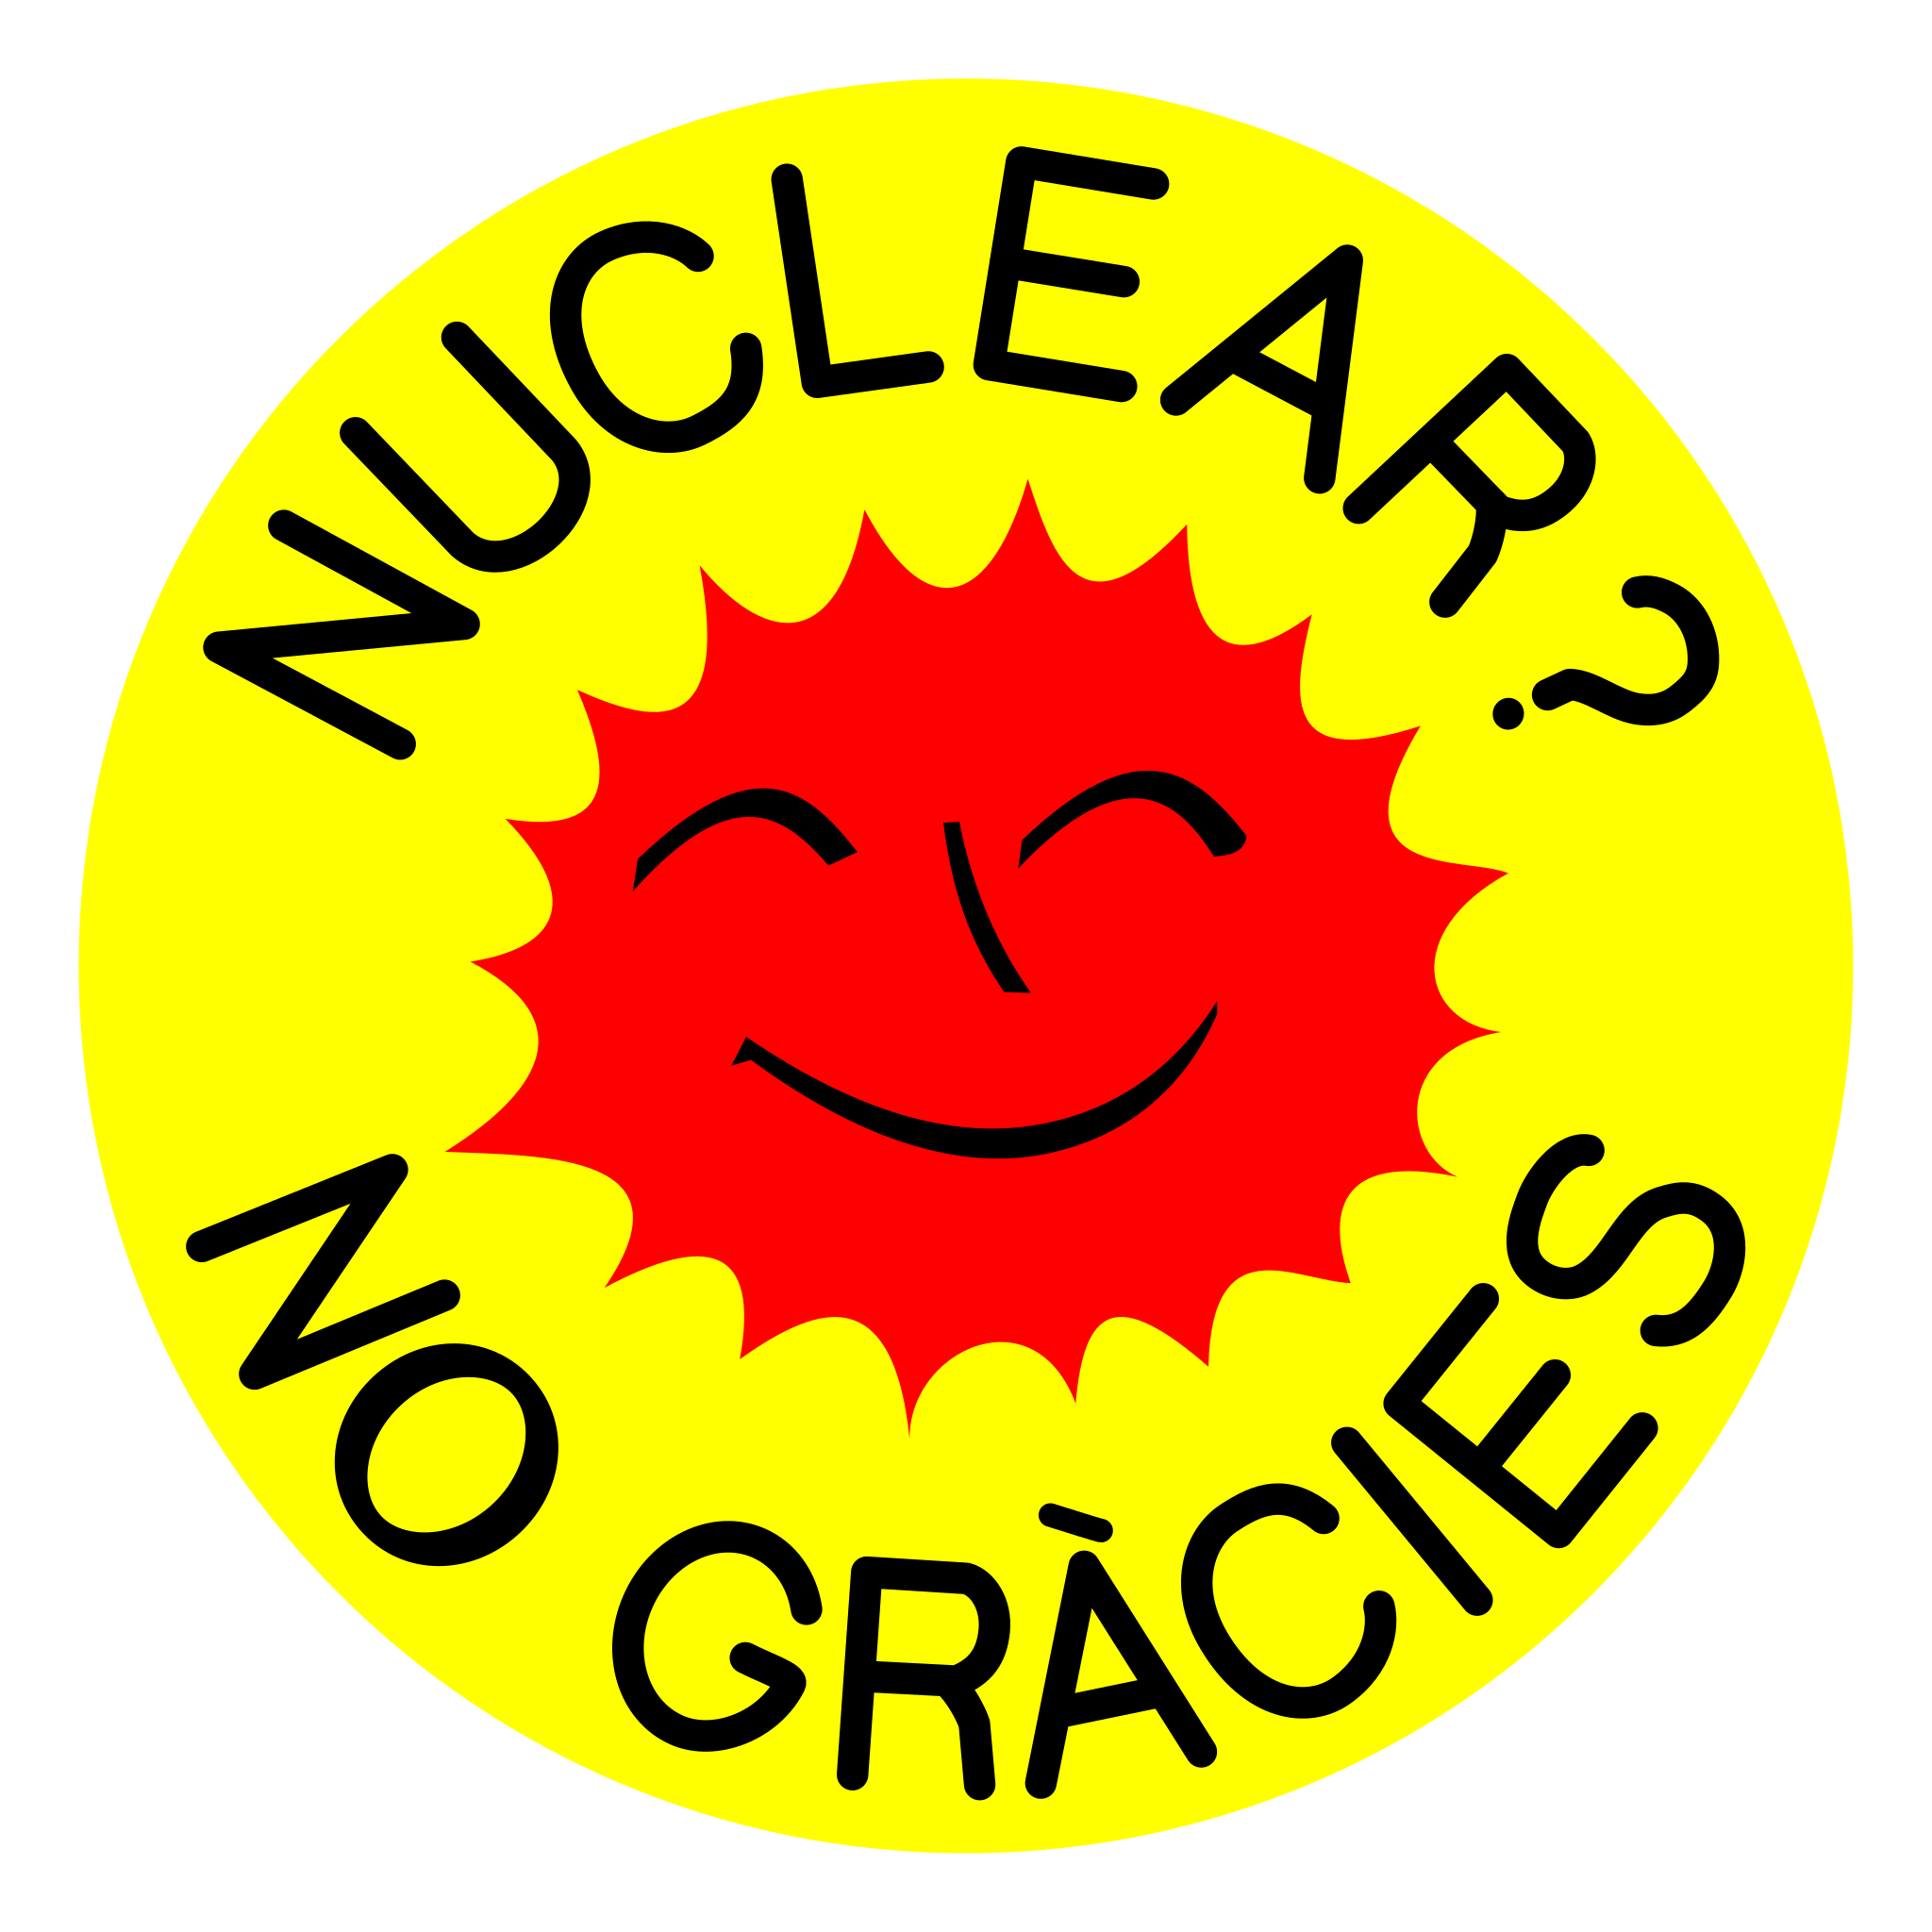 yellow sun with red face in center, words nuclear? no gracias appear in the yellow.